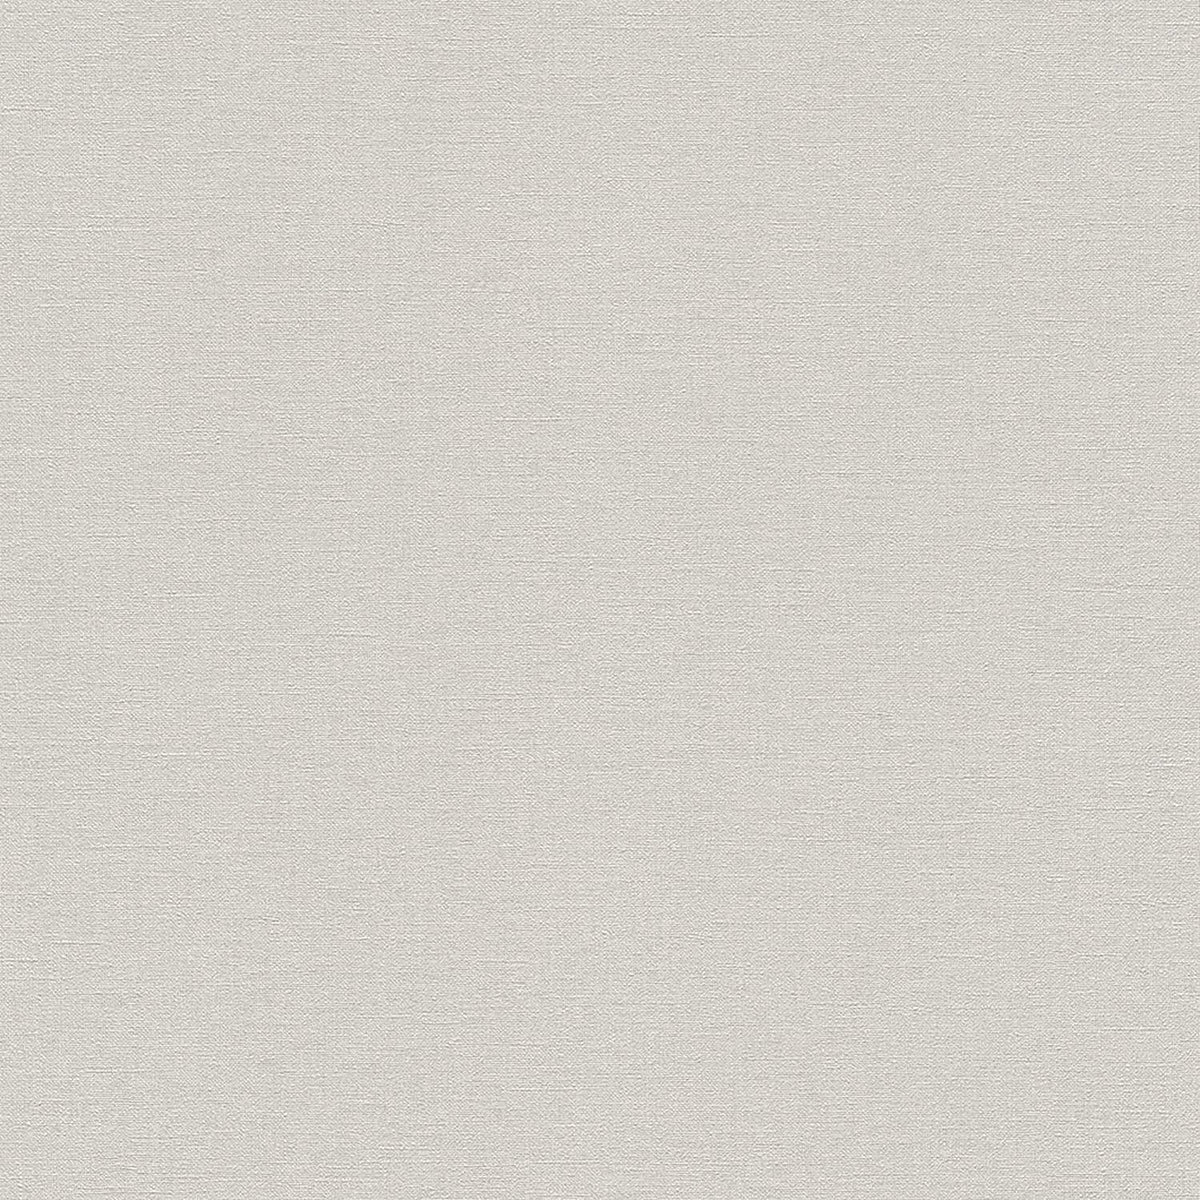 Rasch paperhangings 448610 Non-Woven Wallpaper Collection Florentine